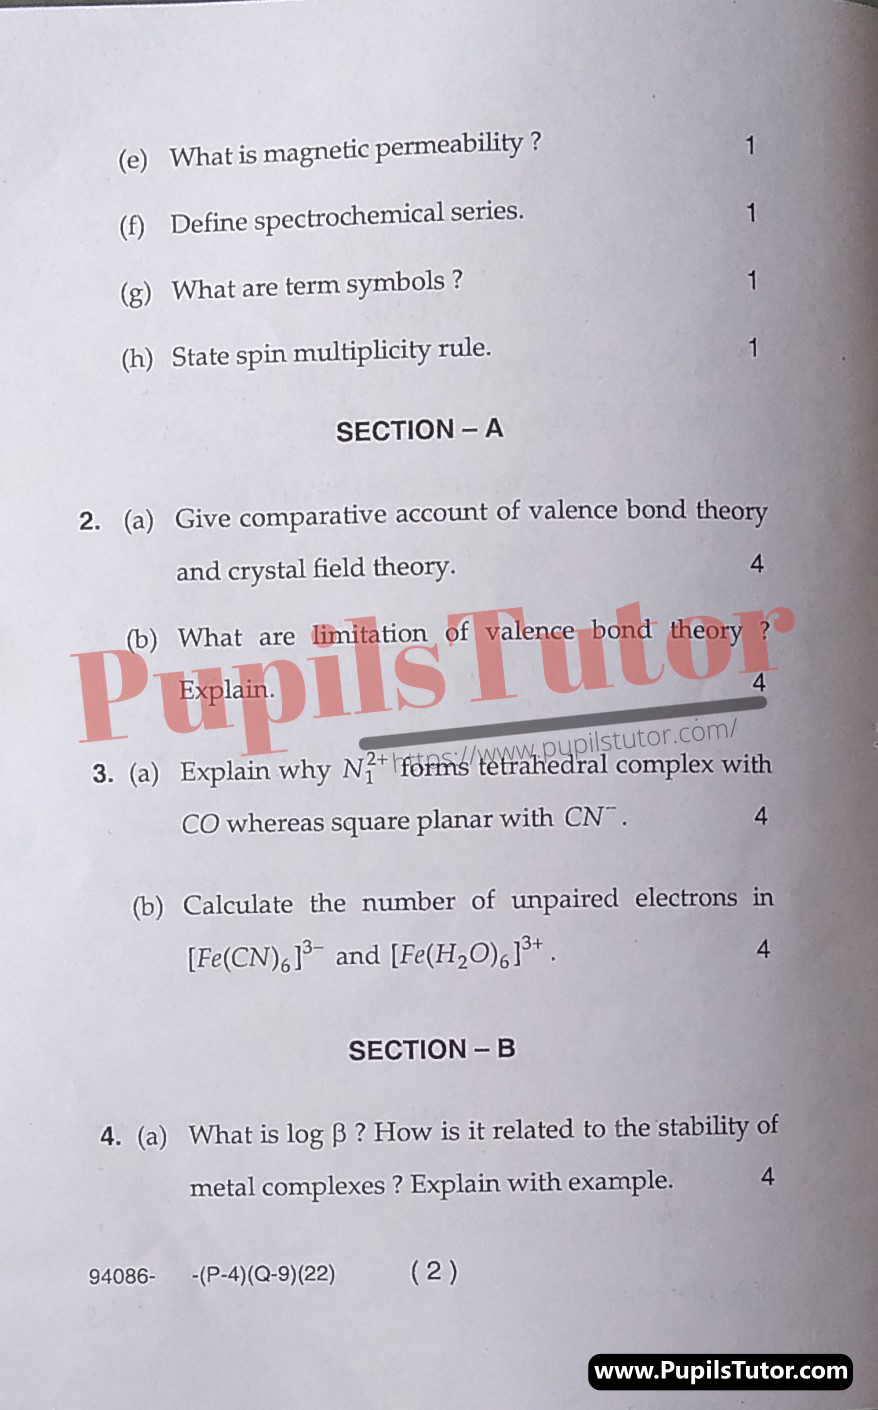 M.D. University B.Sc. [Bio-Tech] Inorganic Chemistry 5th Semester Important Question Answer And Solution - www.pupilstutor.com (Paper Page Number 2)